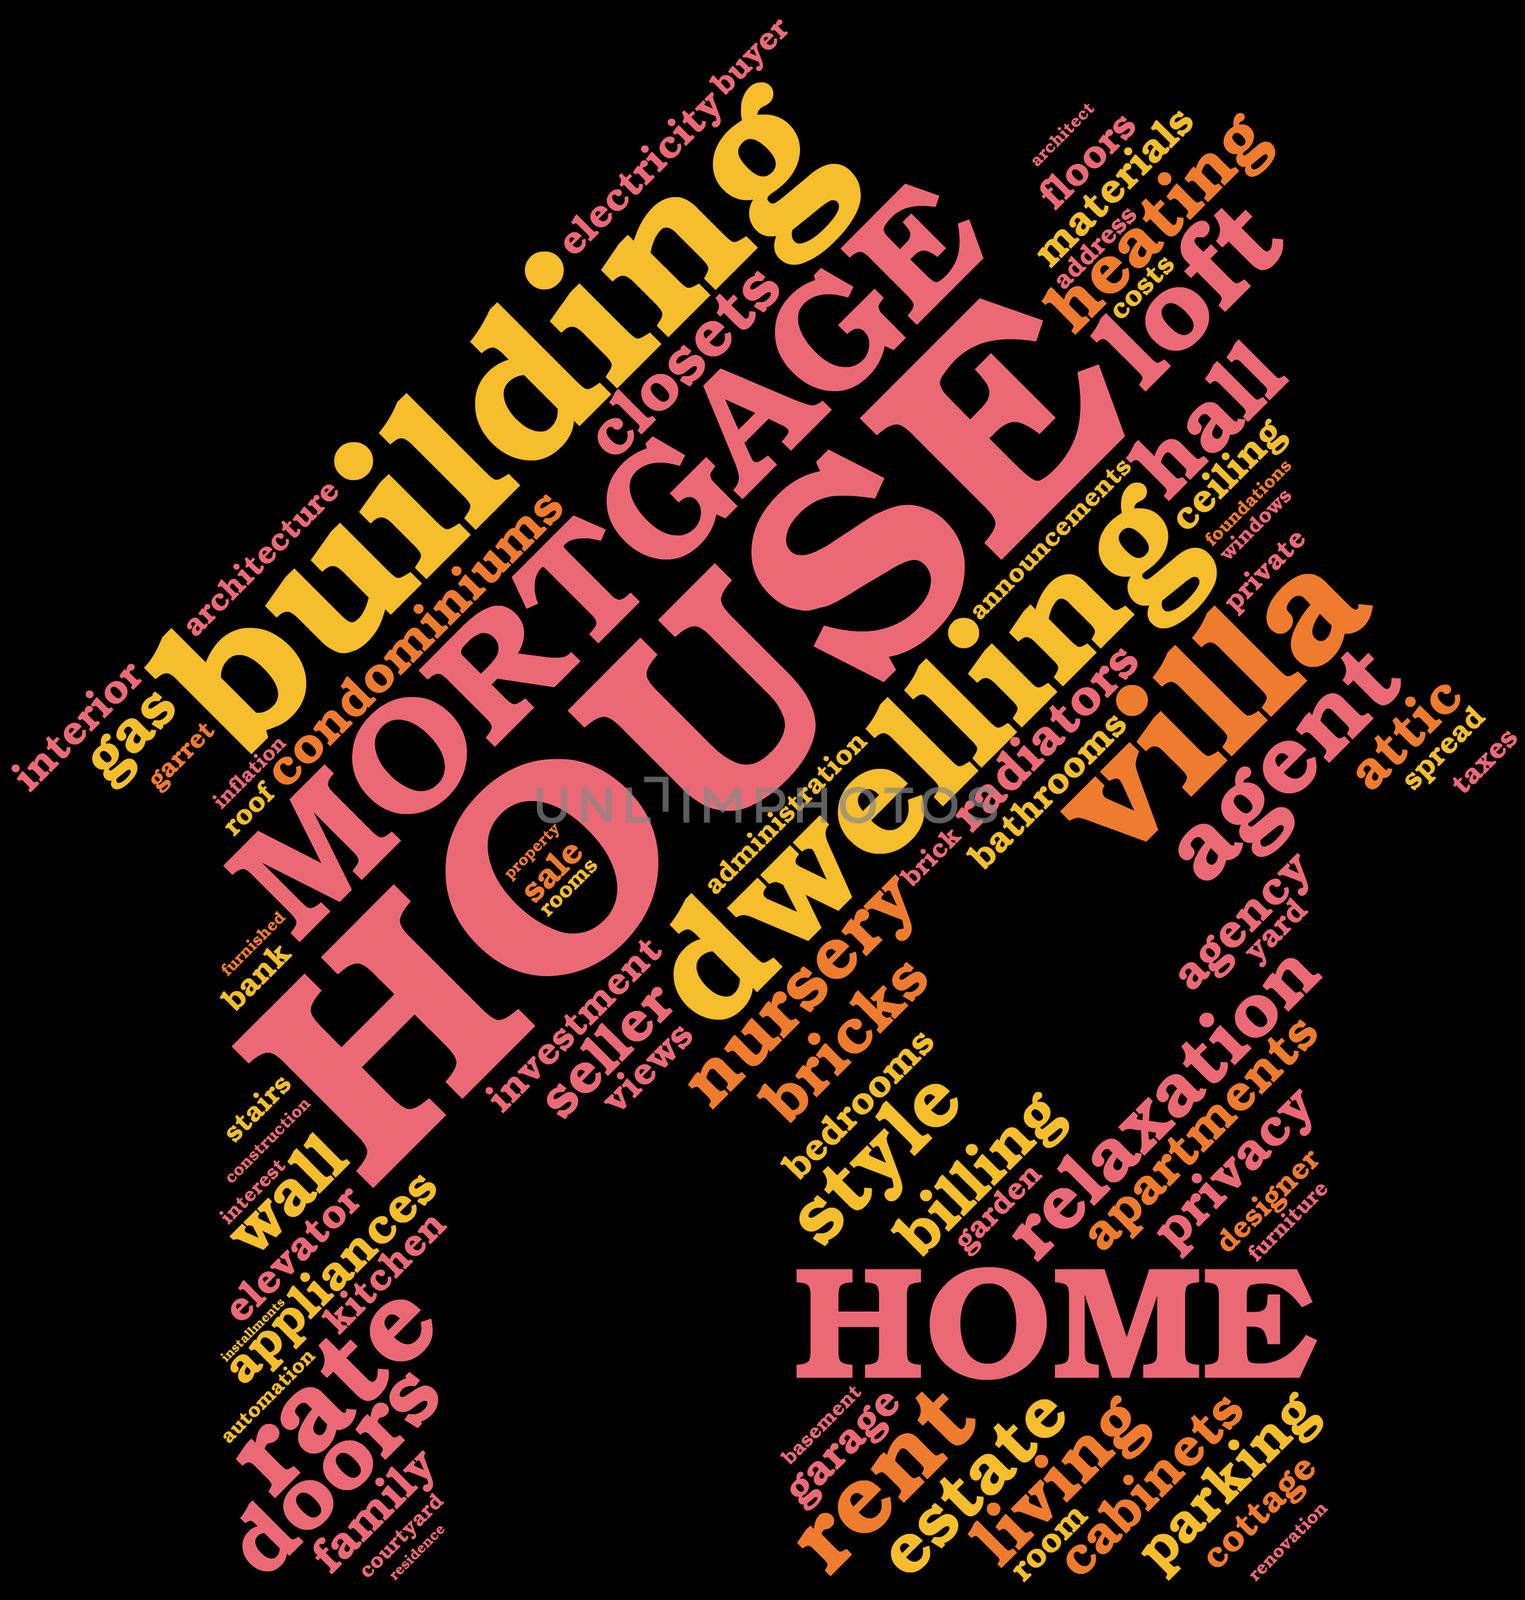 House - shaped tag cloud , home symbol by lifeinapixel